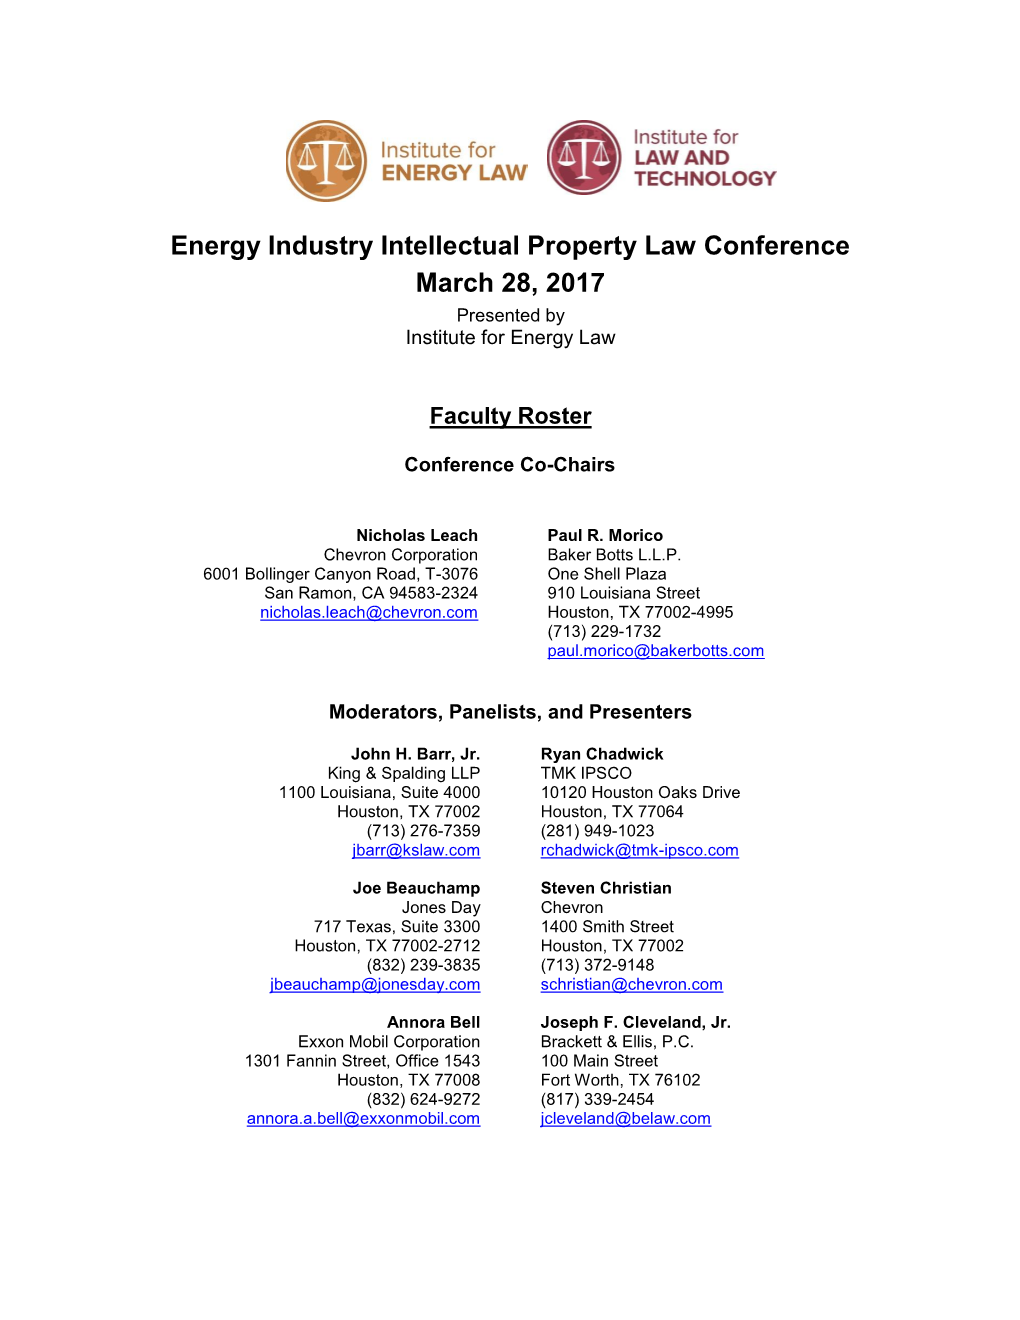 Energy Industry Intellectual Property Law Conference March 28, 2017 Presented by Institute for Energy Law